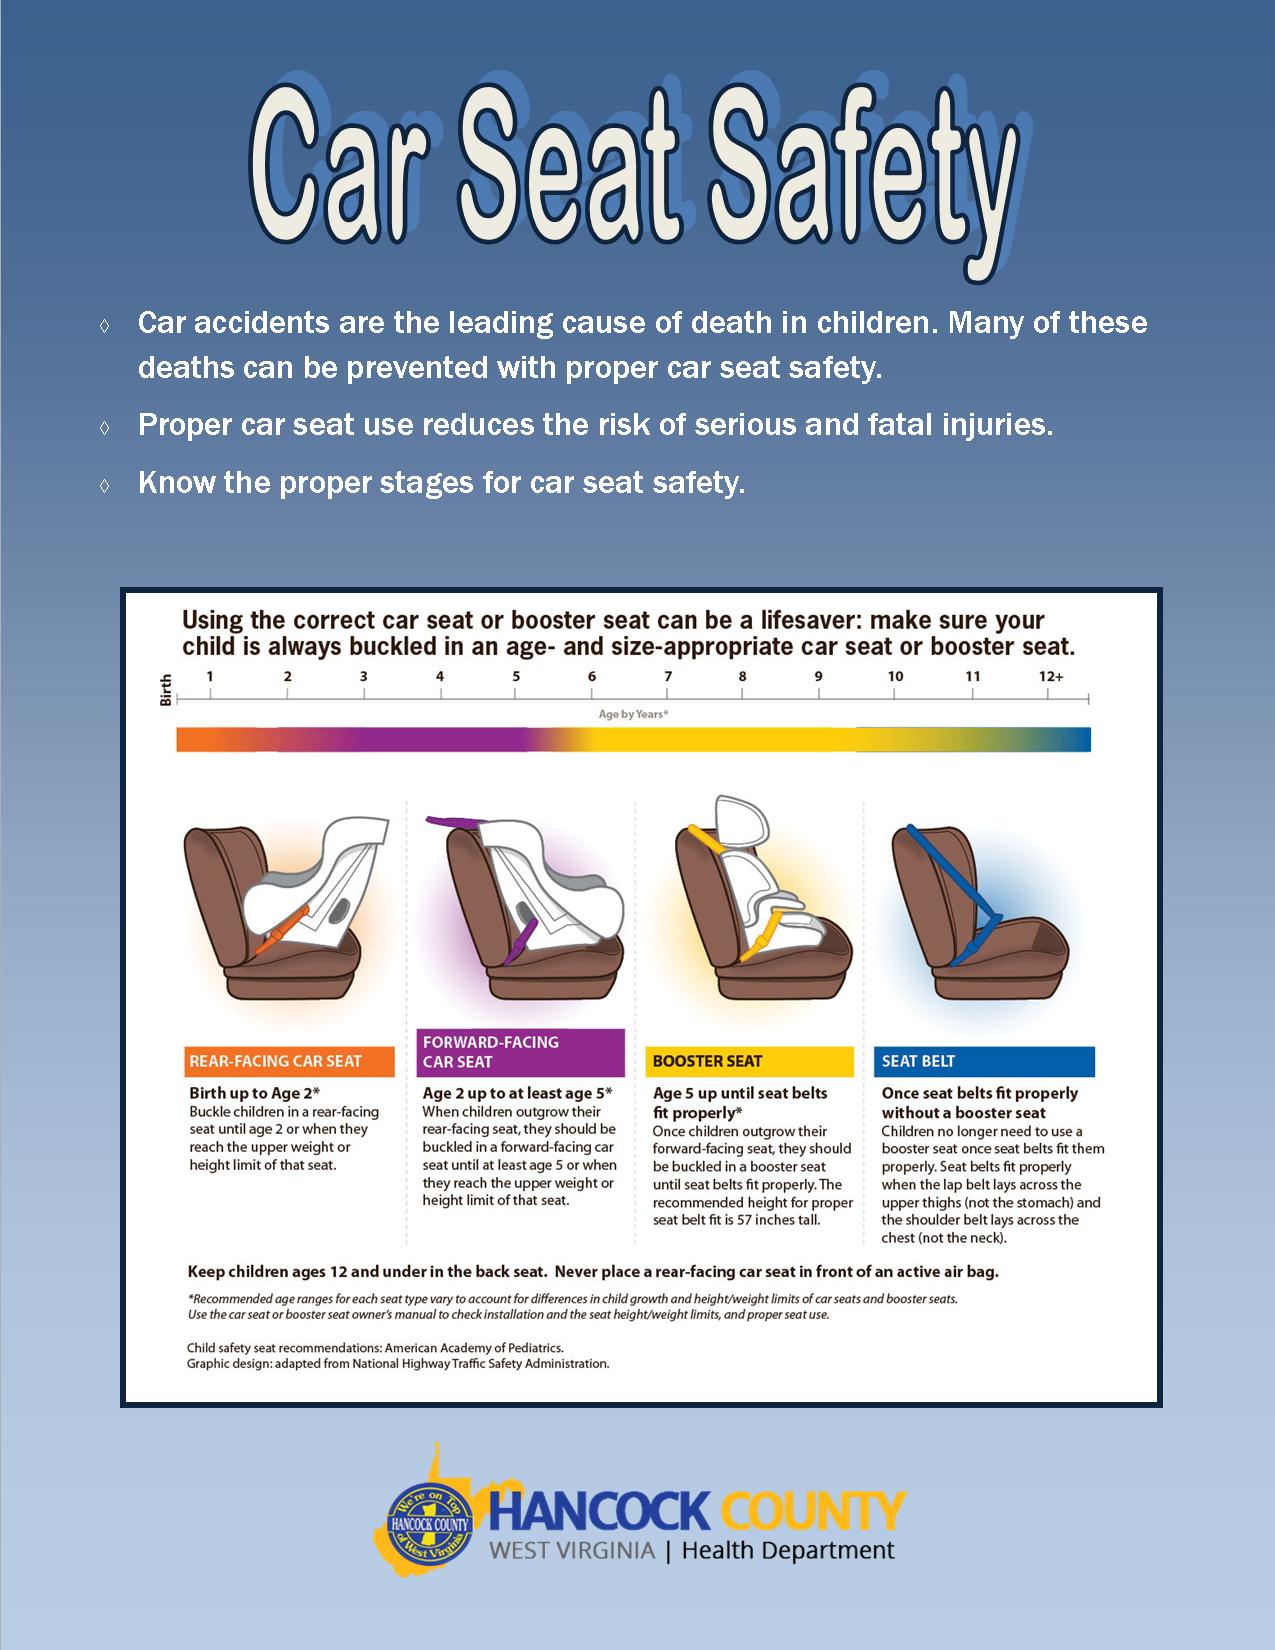 Hancock County Health Department - What Is The Height And Weight Requirements For A Booster Seat In Wv